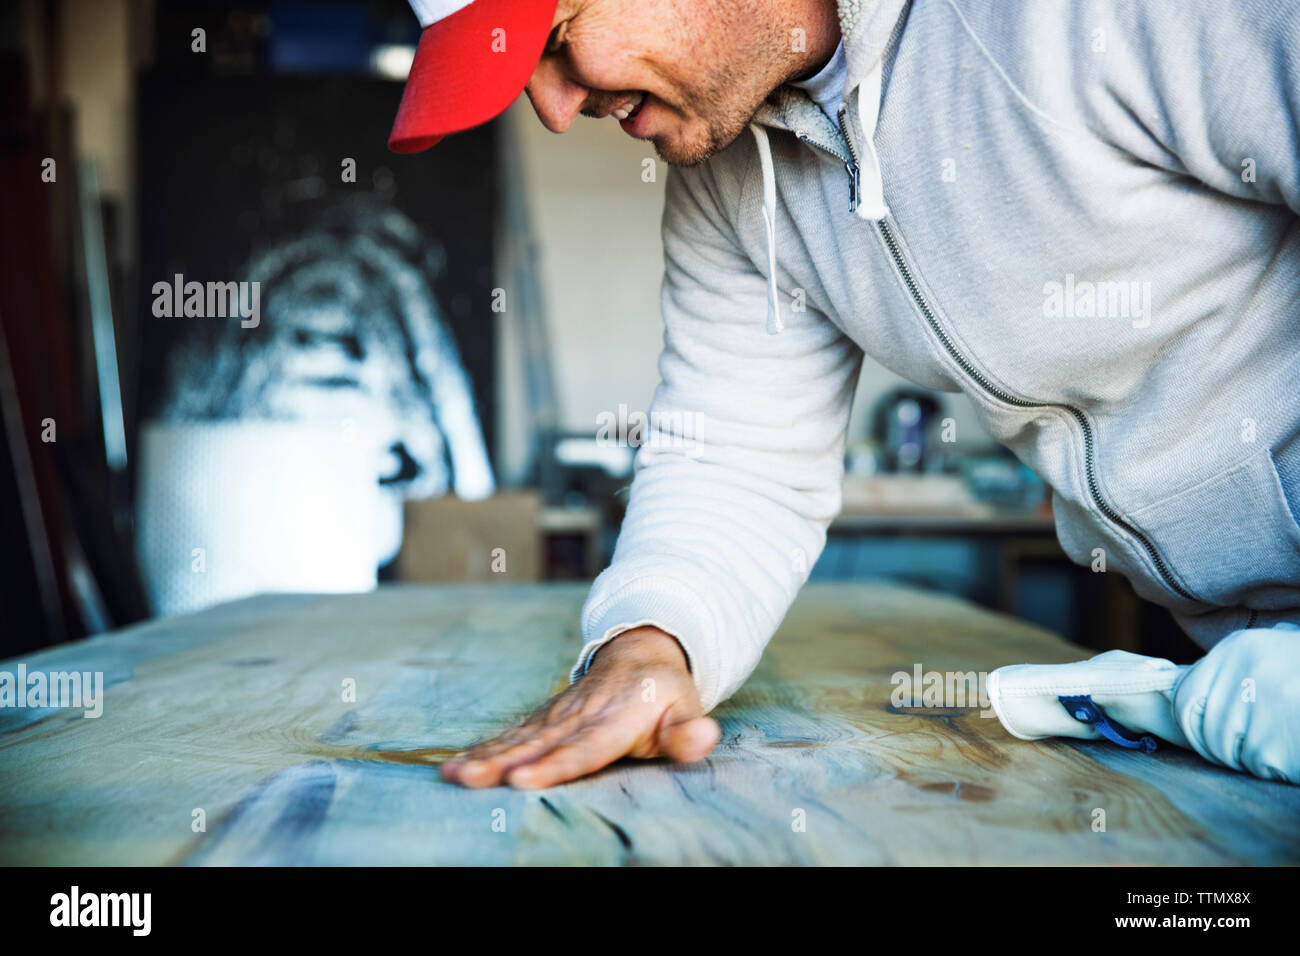 Cropped image of smiling man touching wooden surface at workshop Stock Photo